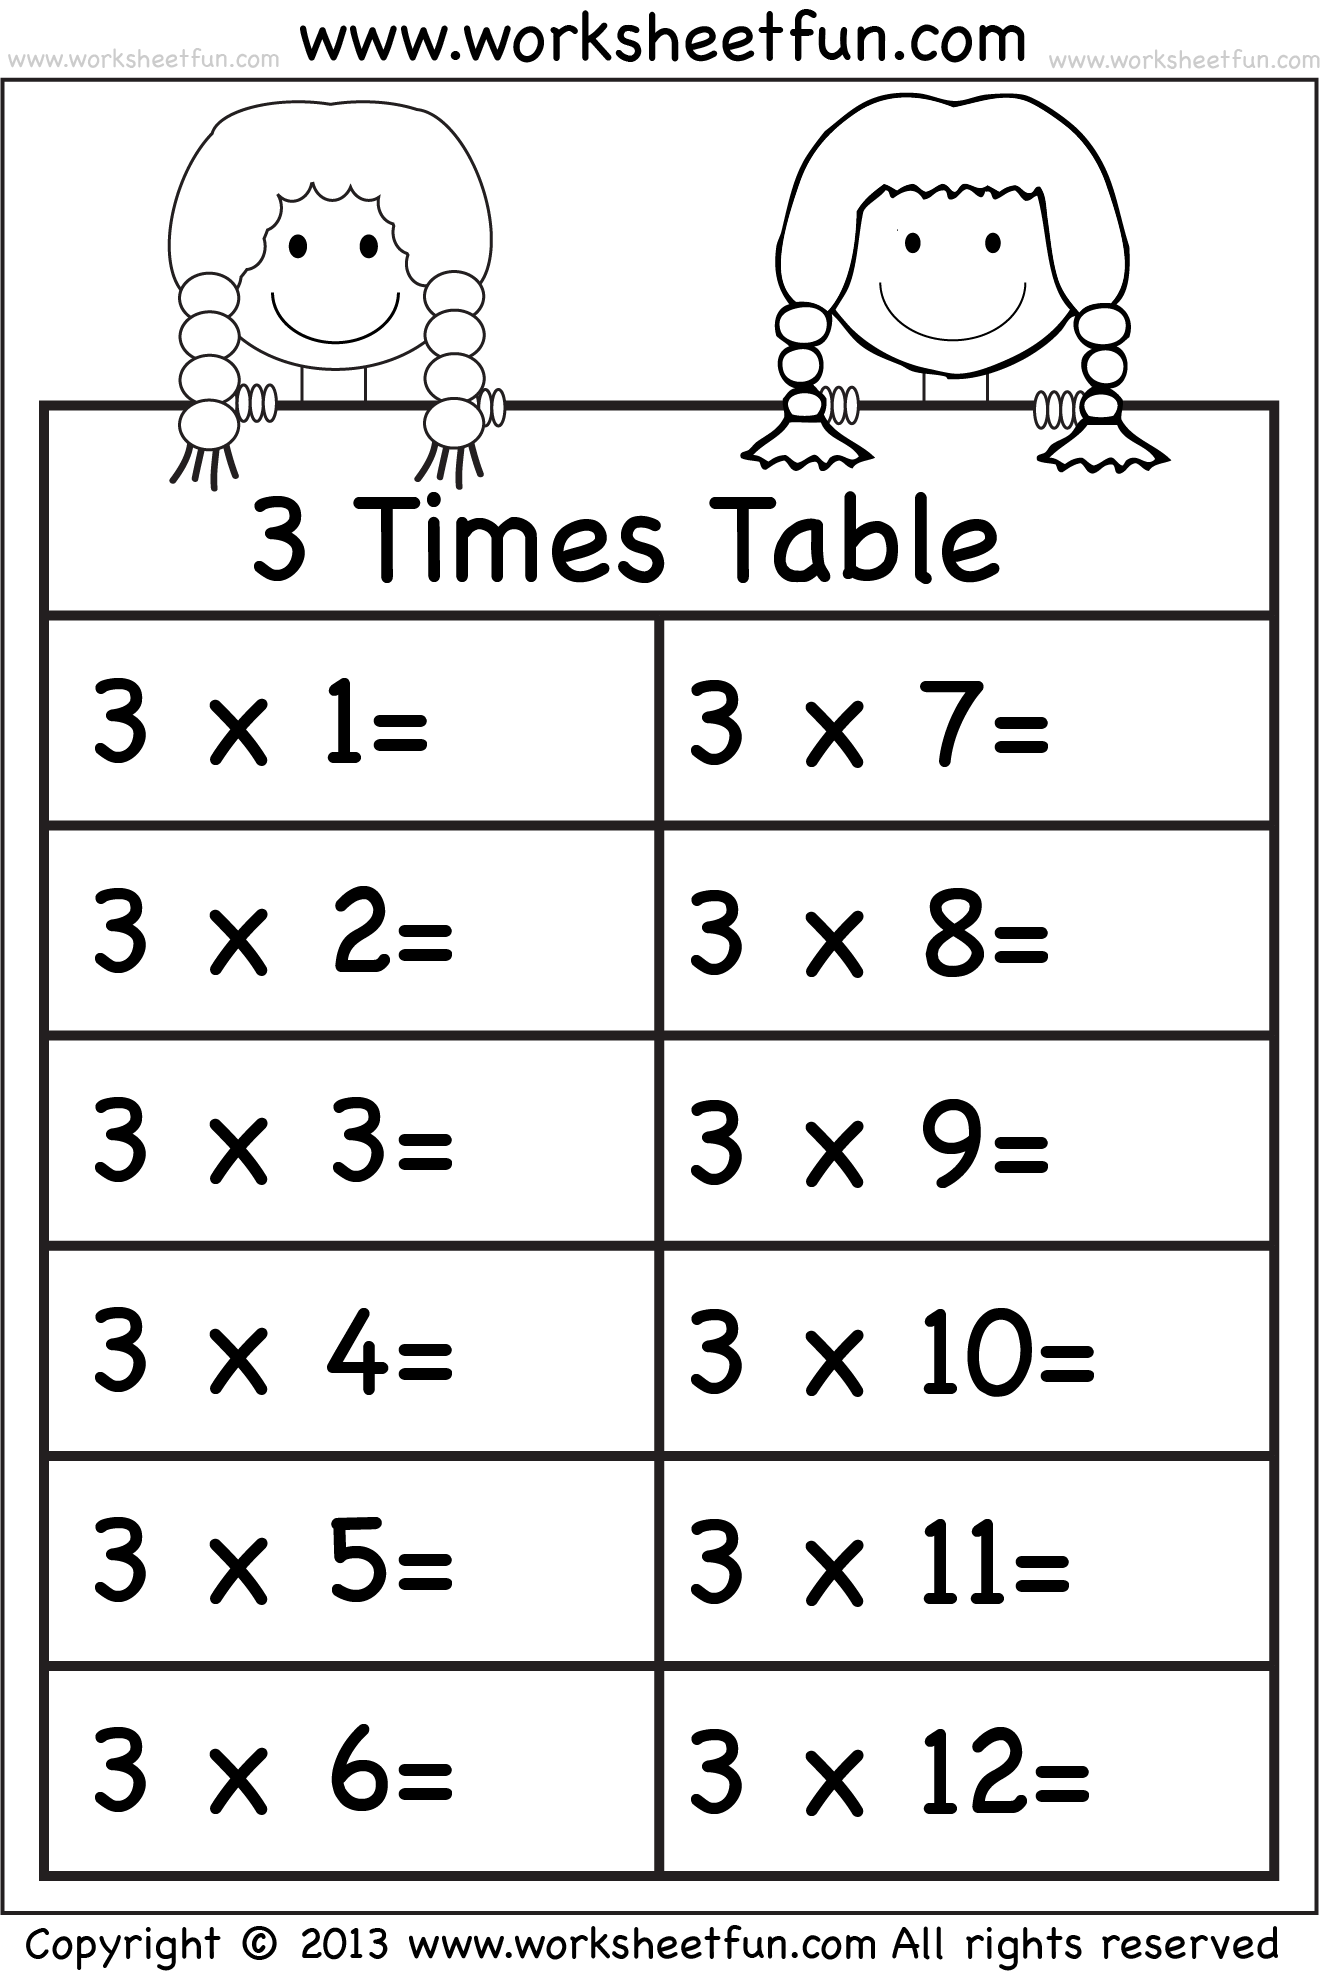 Times Tables Worksheets - 2, 3, 4, 5, 6, 7, 8, 9, 10, 11 ...